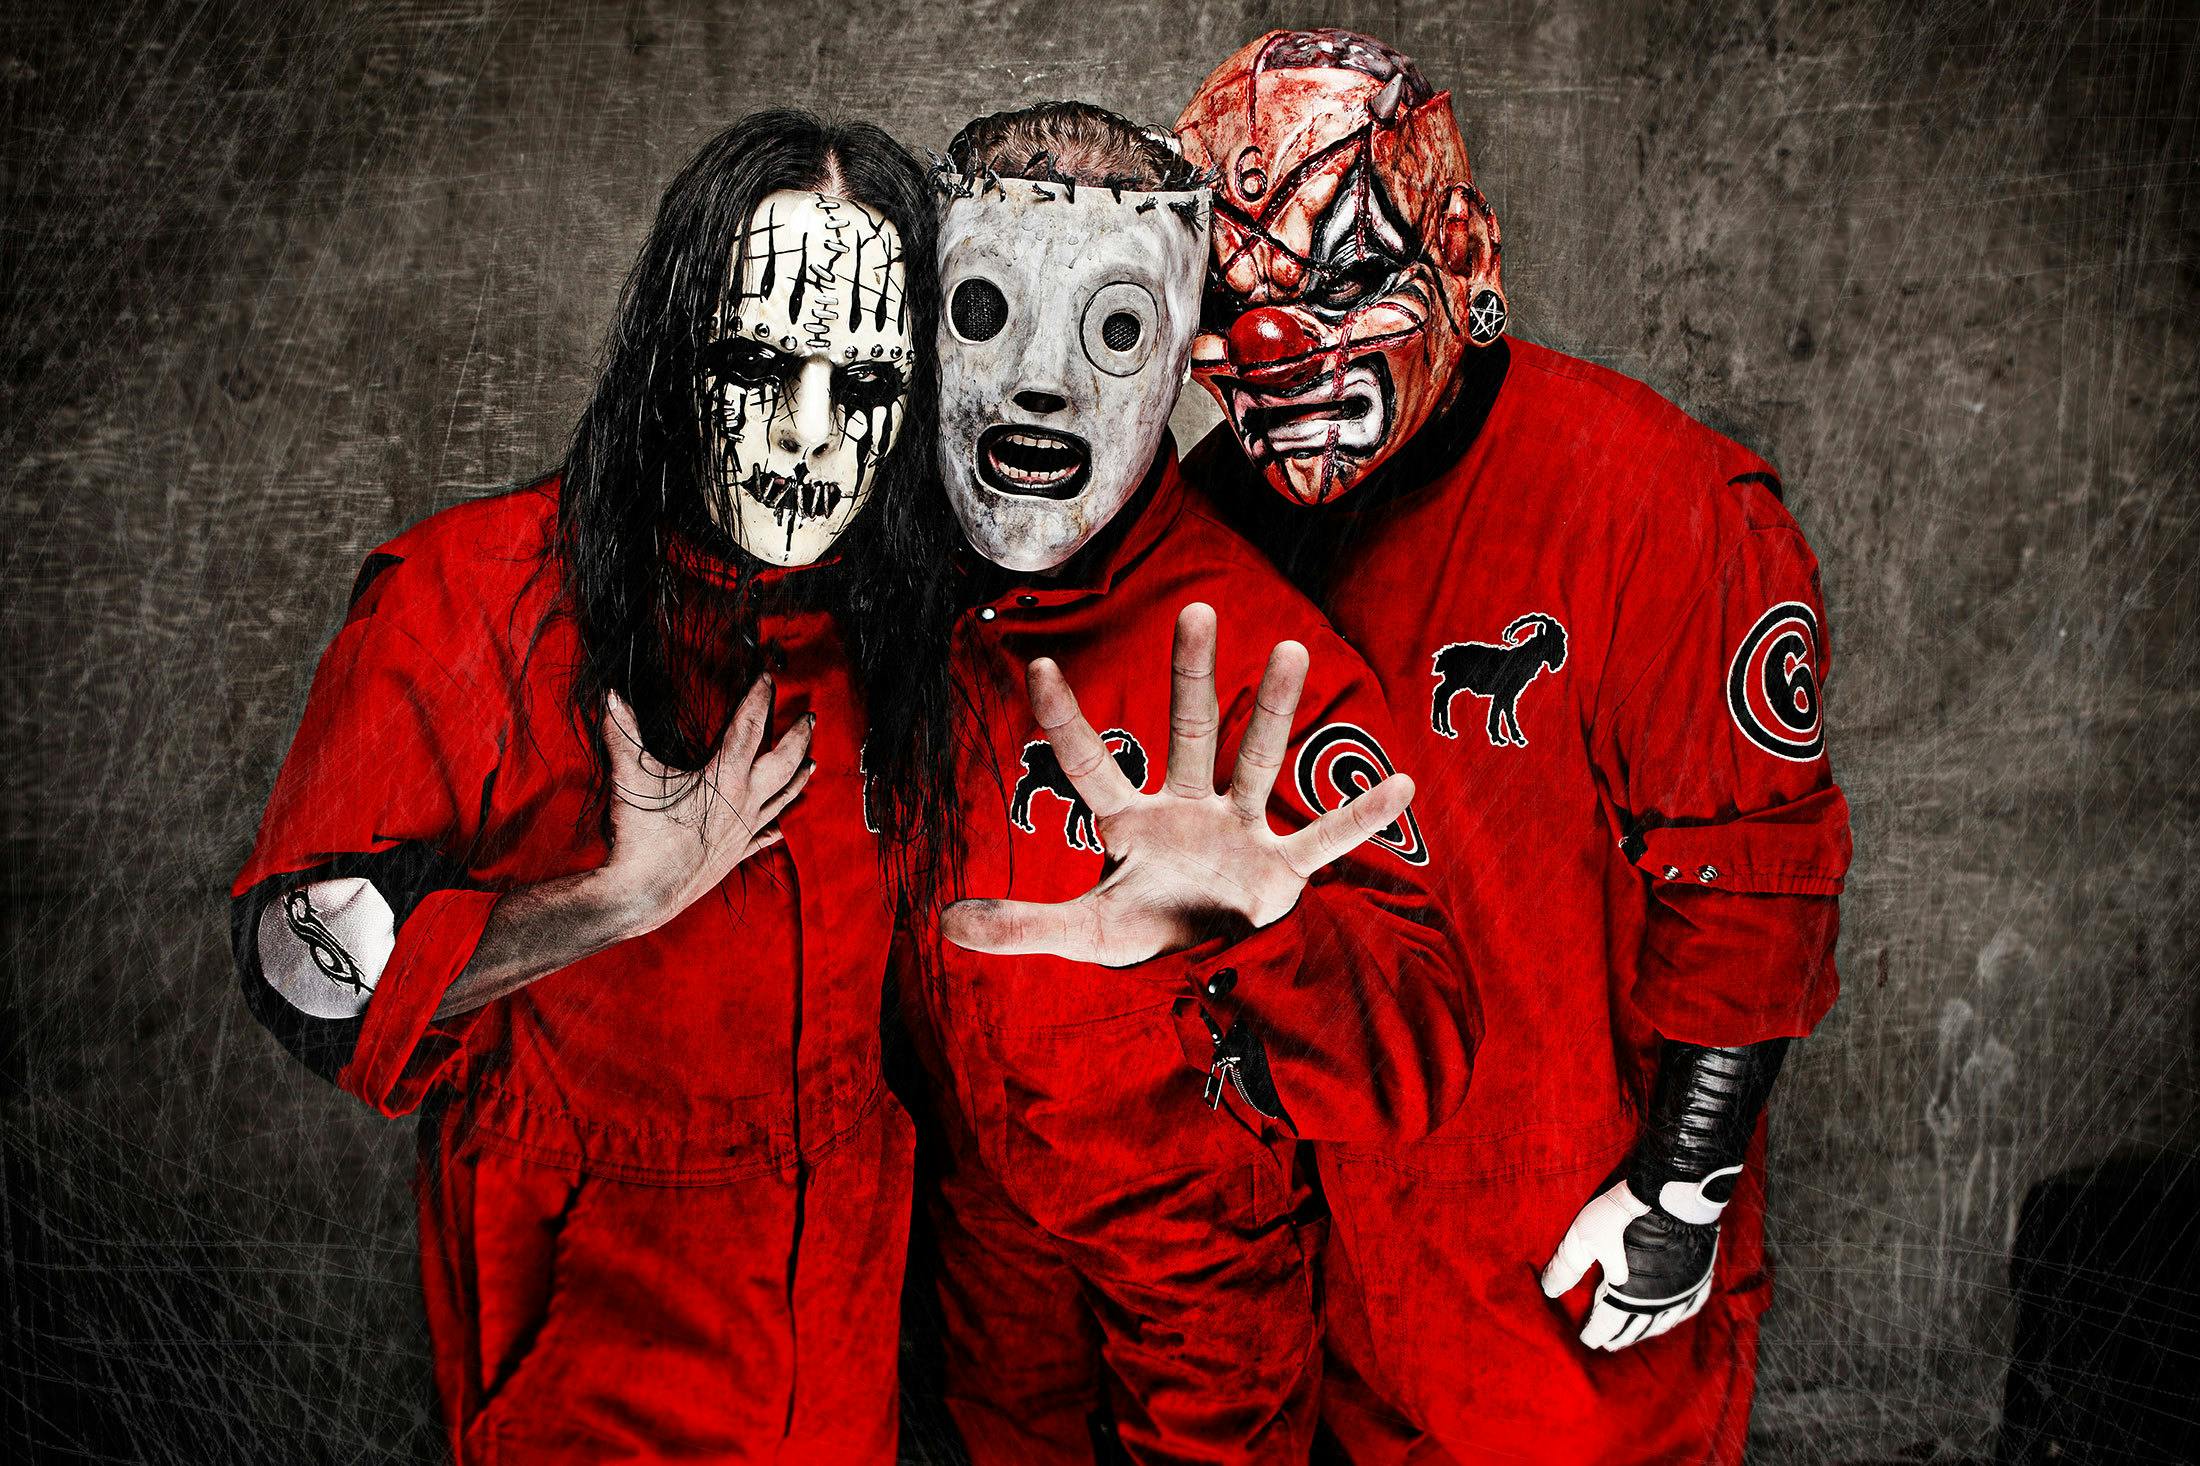 Corey Taylor on Joey Jordison: “He was one of the true musical geniuses I’d ever met, he was just complicated”